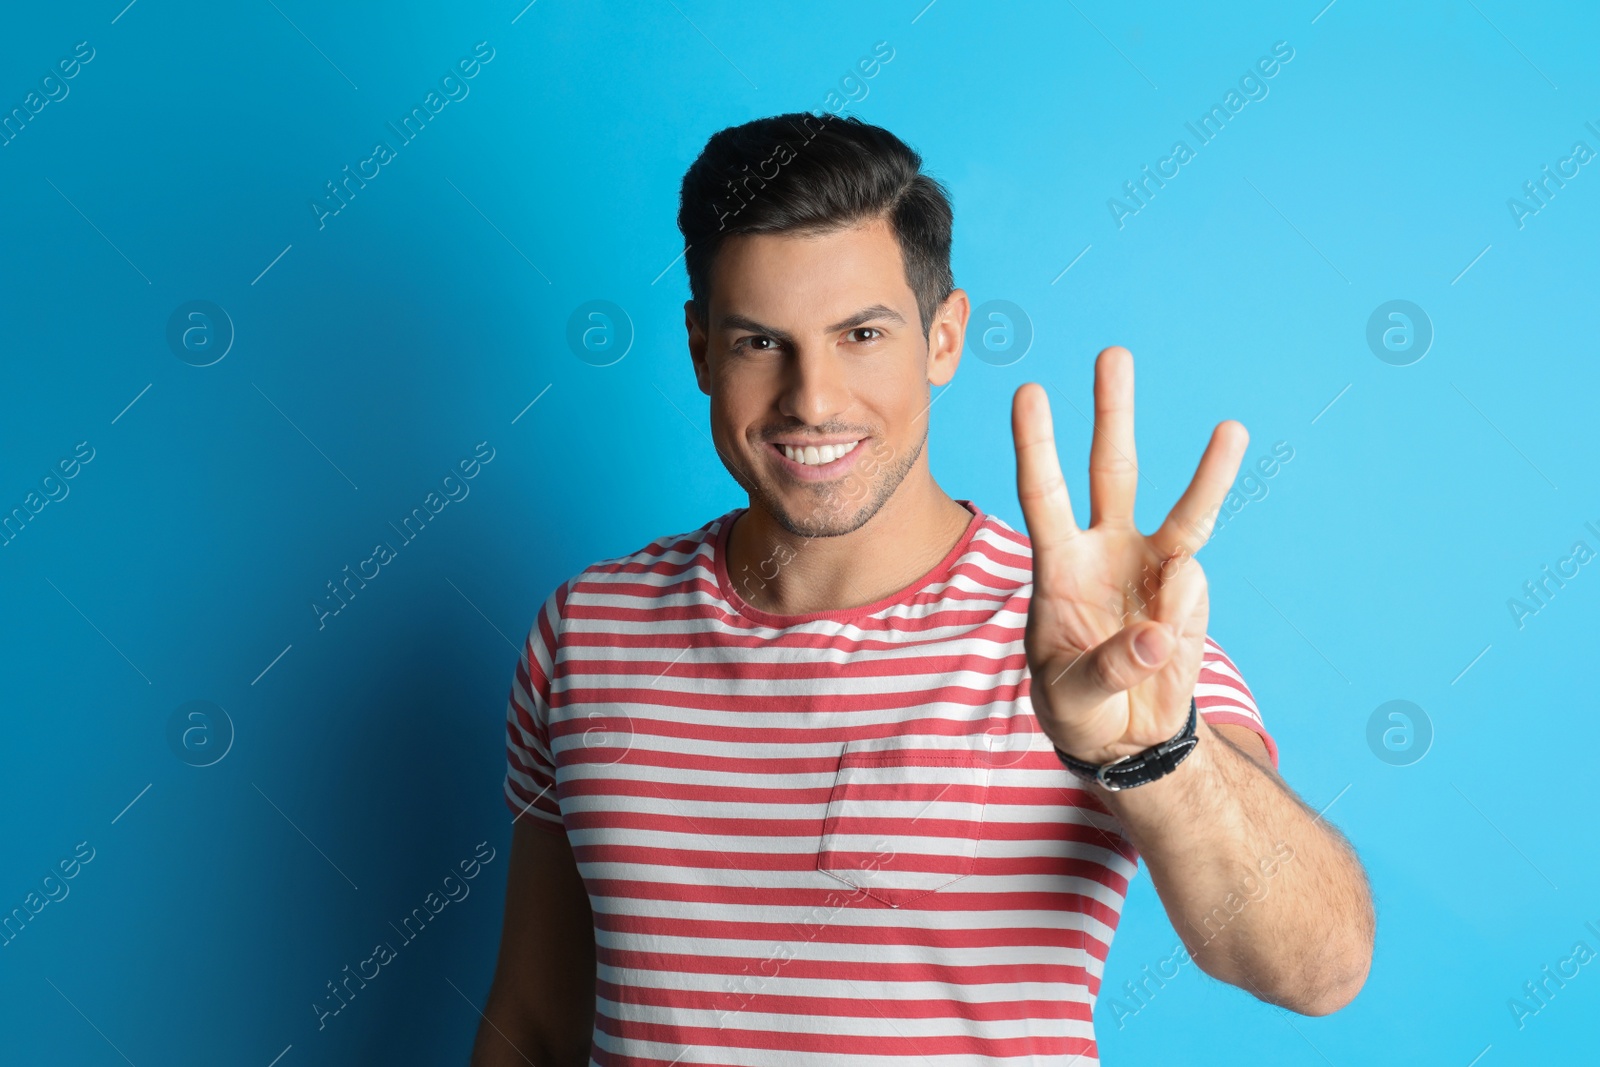 Photo of Man showing number three with his hand on light blue background